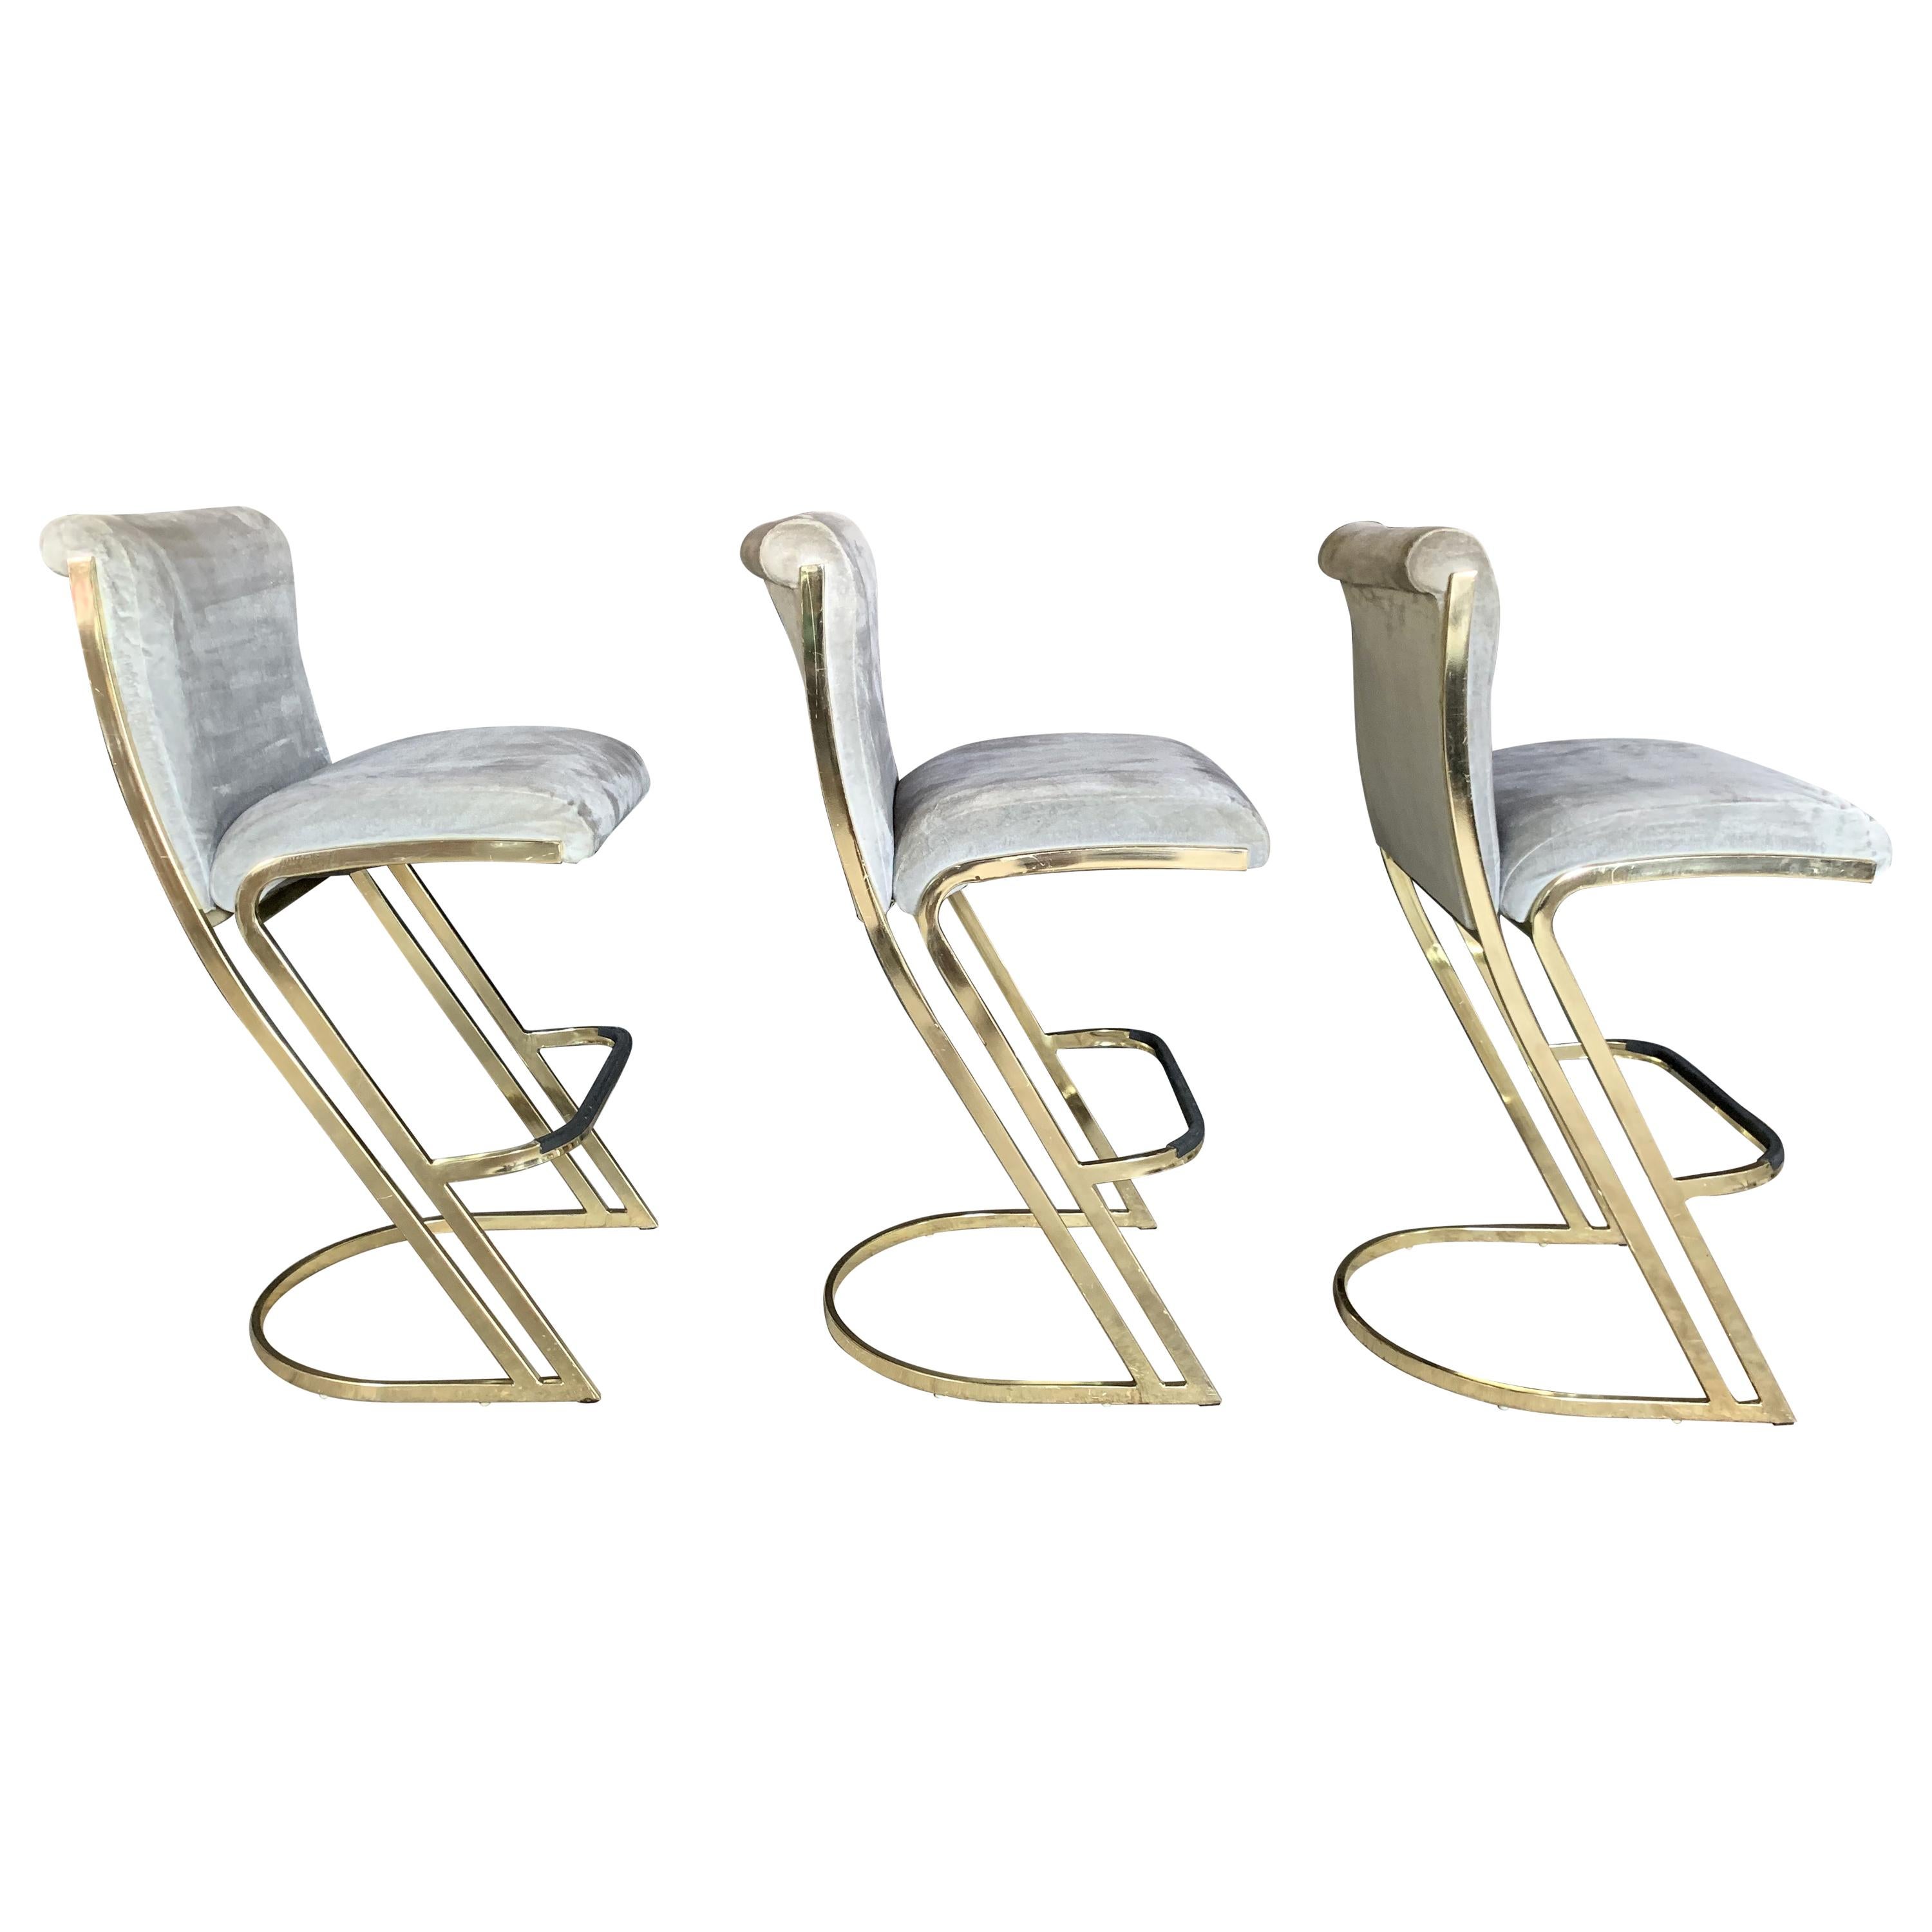 Set of Three Brass Stools in the Style of Pierre Cardin